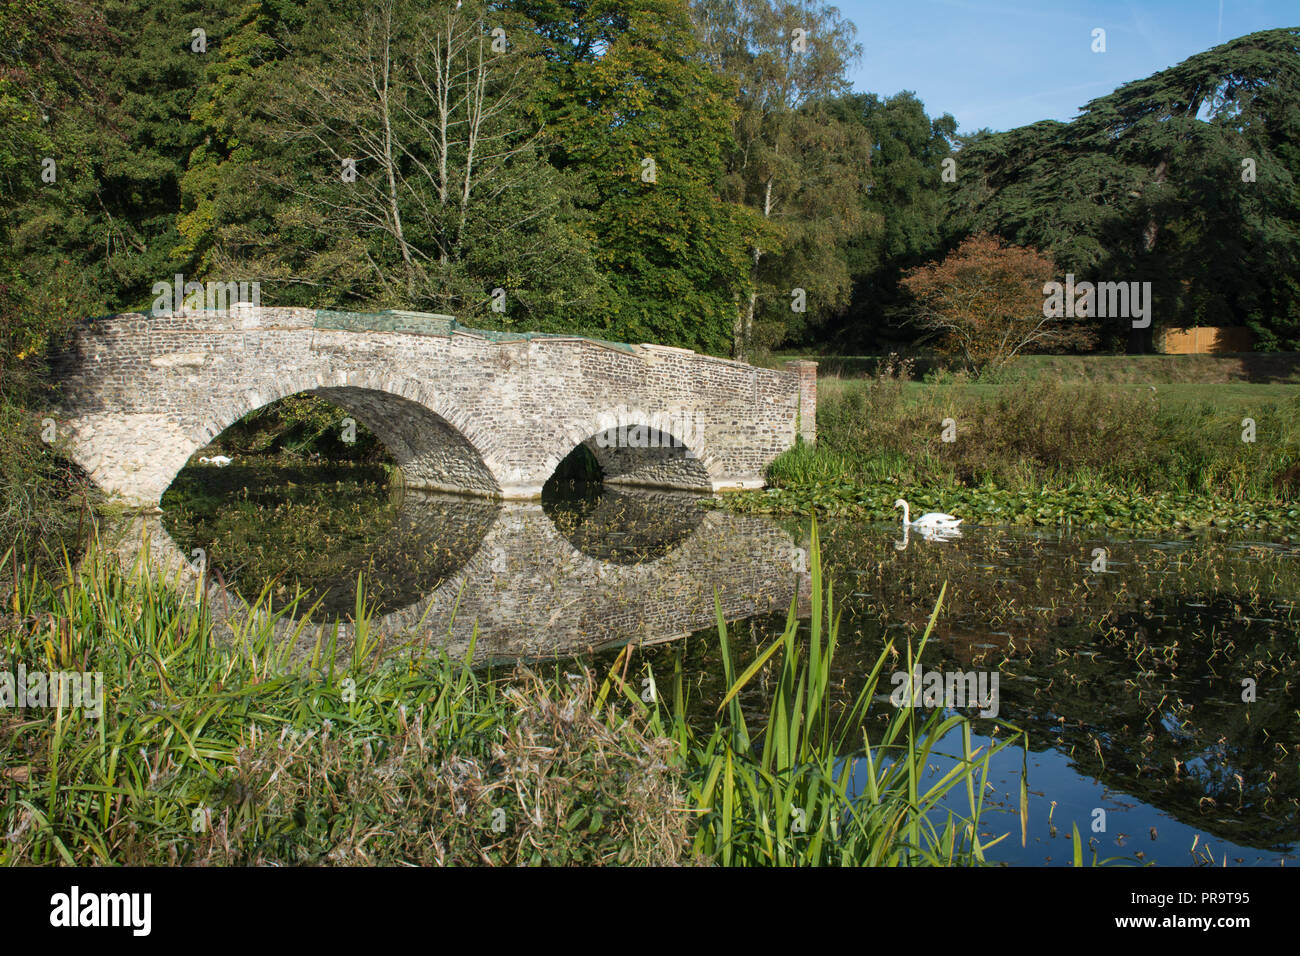 Swans swimming on the lake with the historic arched stone bridge at Waverley Abbey House, Surrey, UK Stock Photo